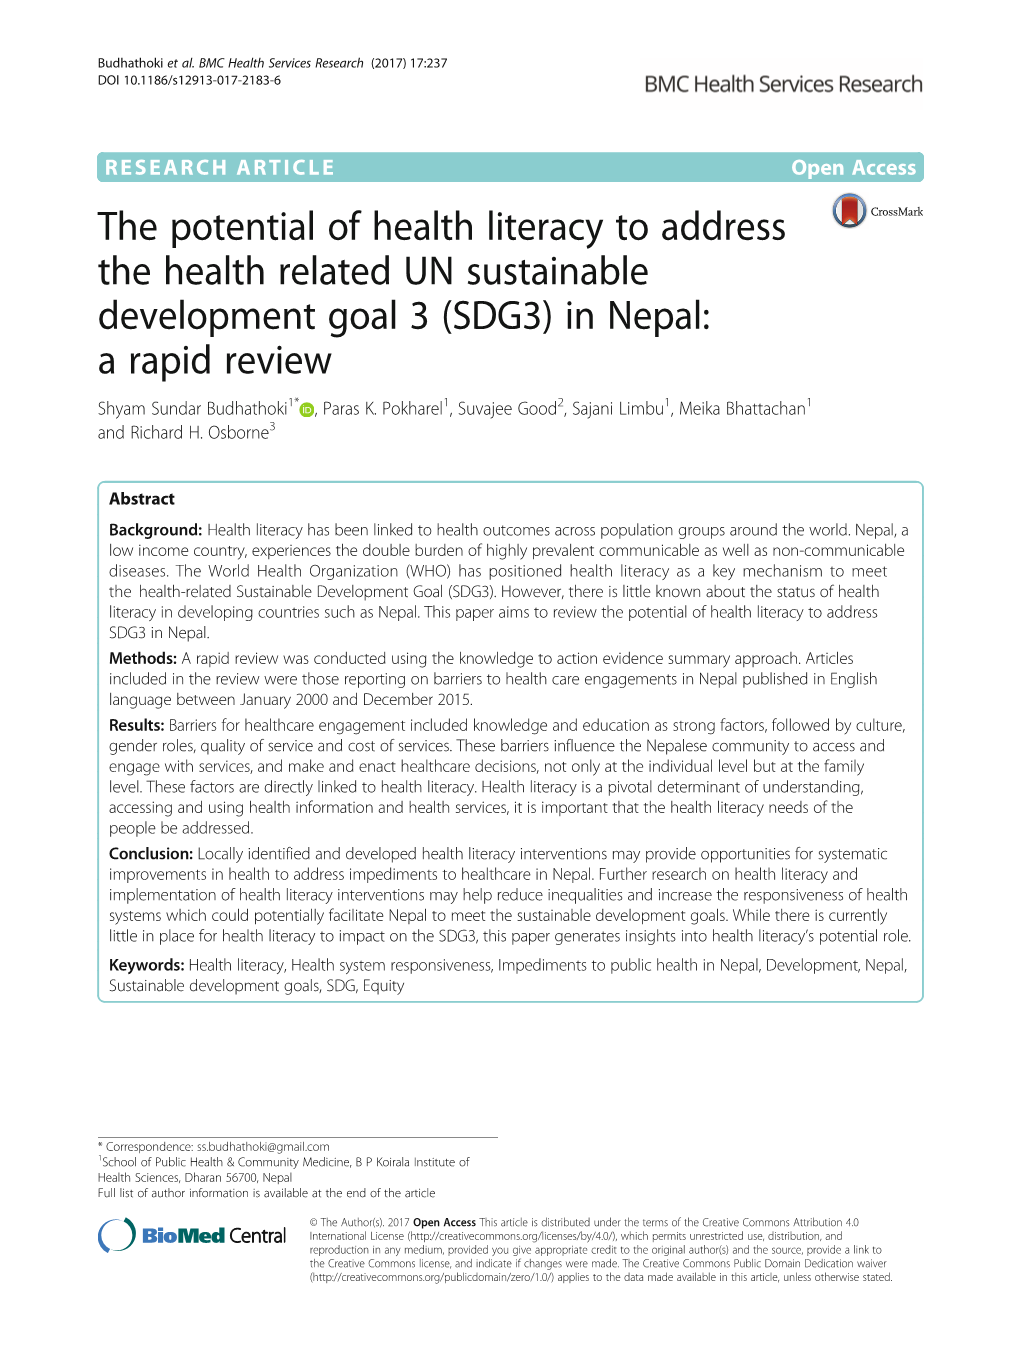 The Potential of Health Literacy to Address the Health Related UN Sustainable Development Goal 3 (SDG3) in Nepal: a Rapid Review Shyam Sundar Budhathoki1* , Paras K